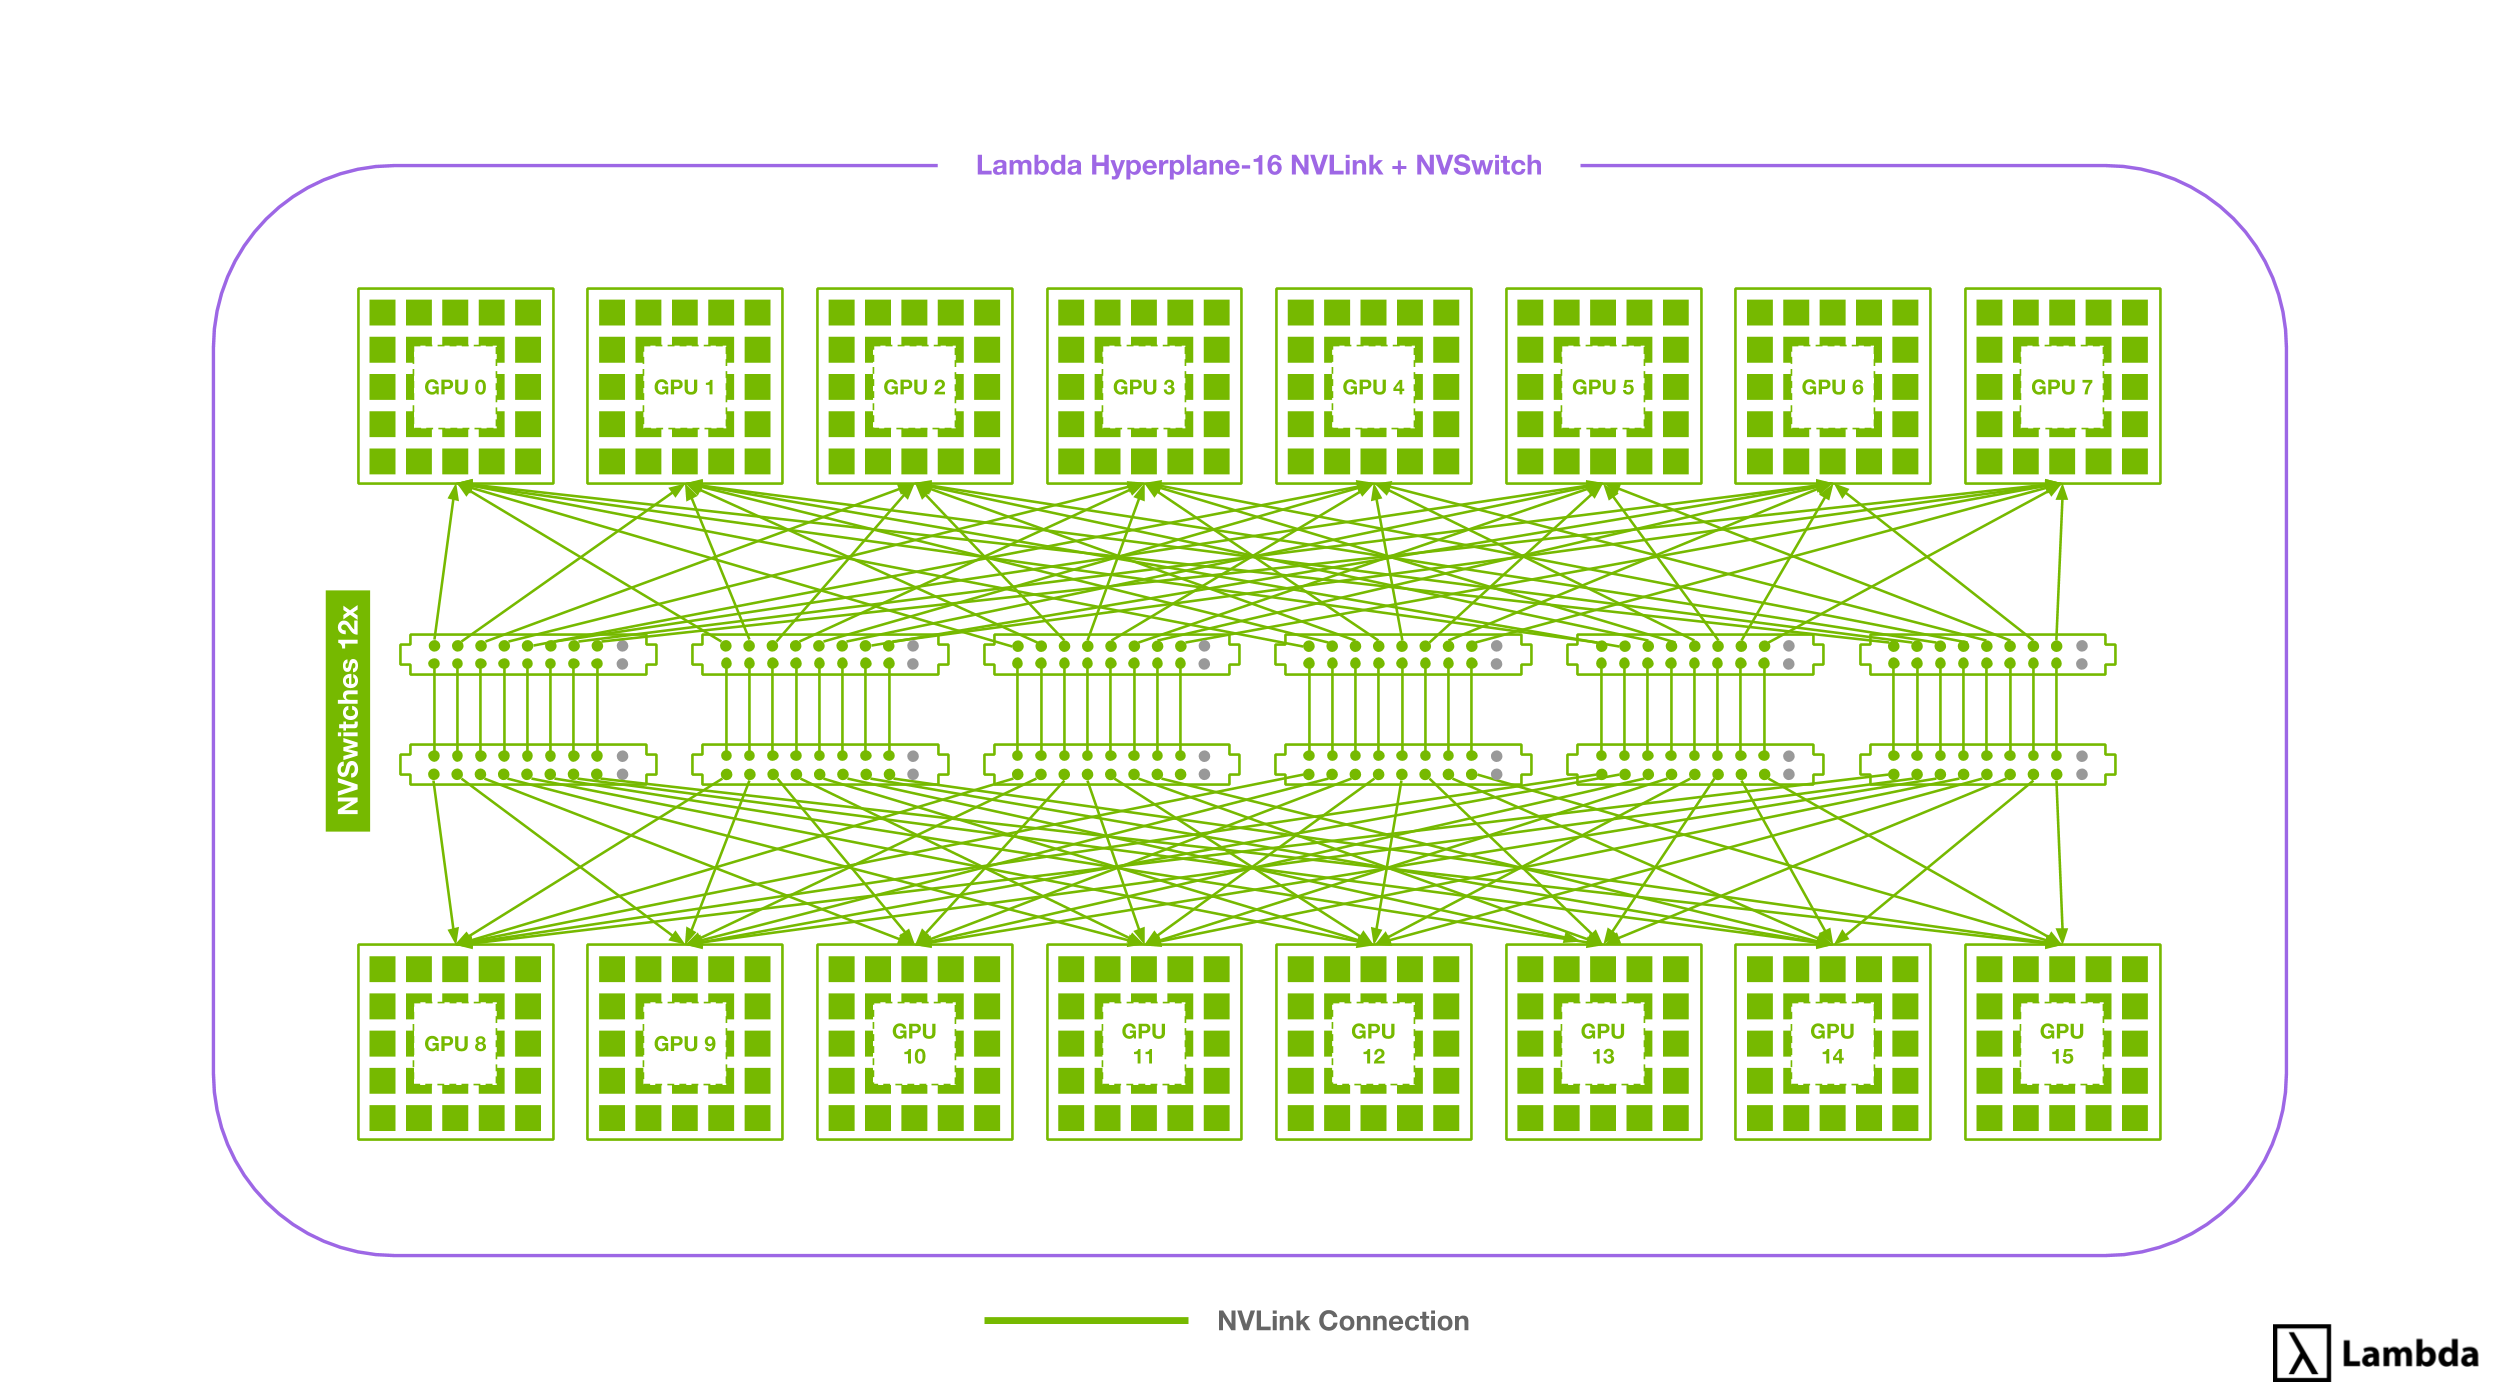 Diagram of 16-way NVLink setup using NVSwitches found in the Hyperplane-16.